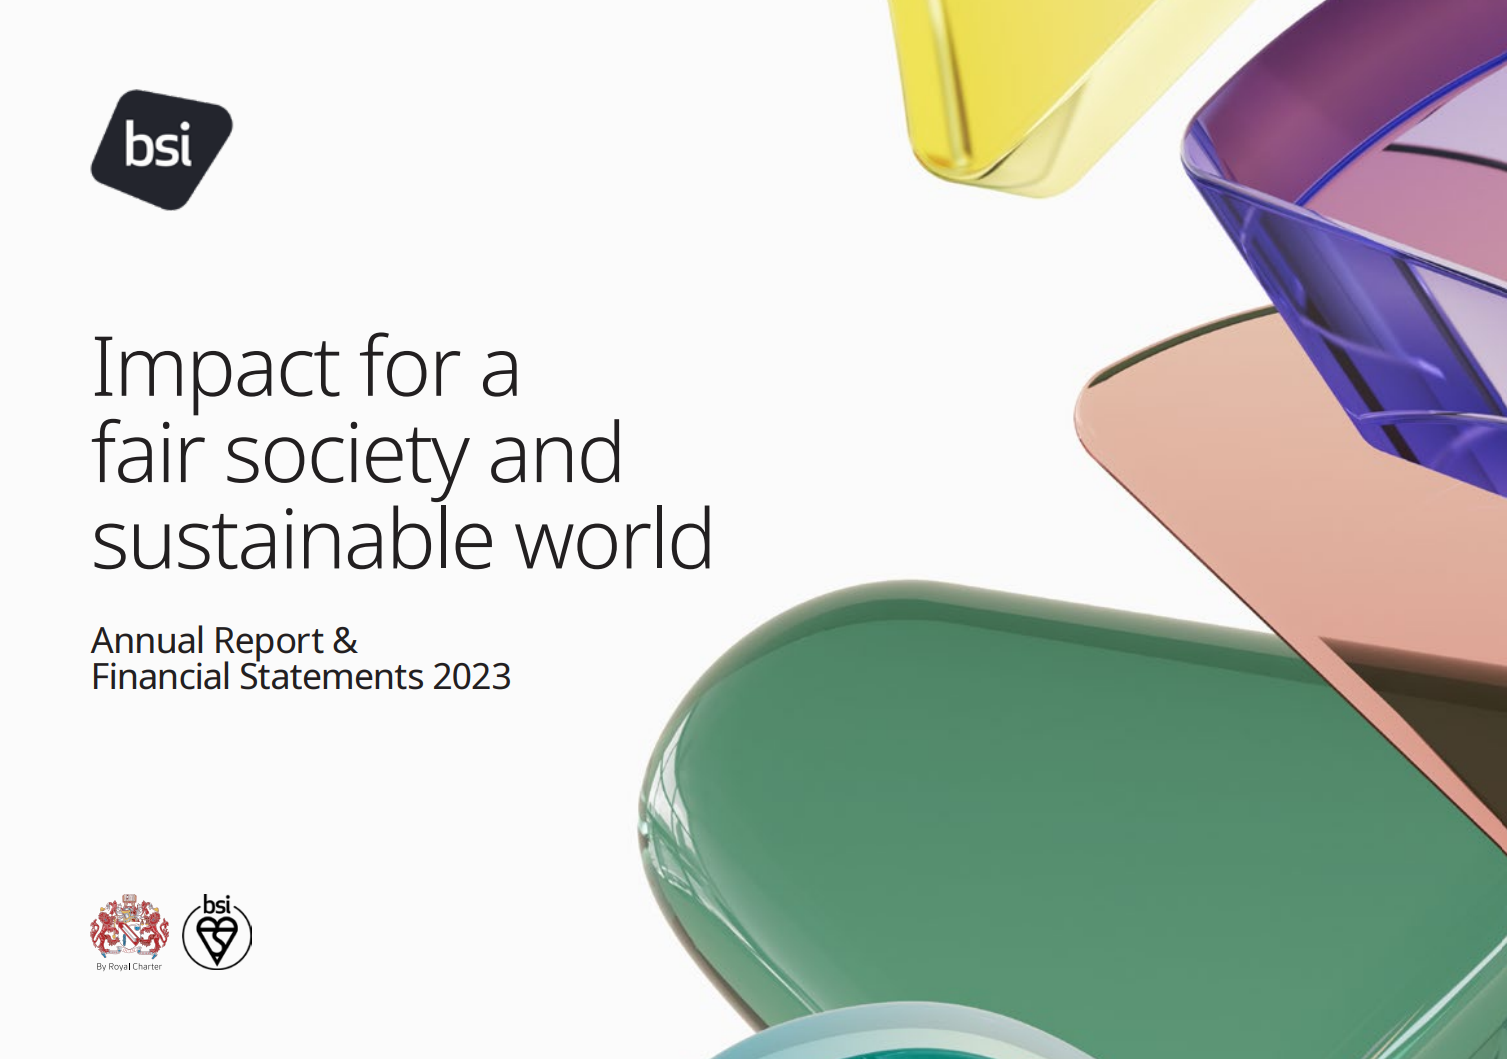 BSI publishes Annual Report 2023